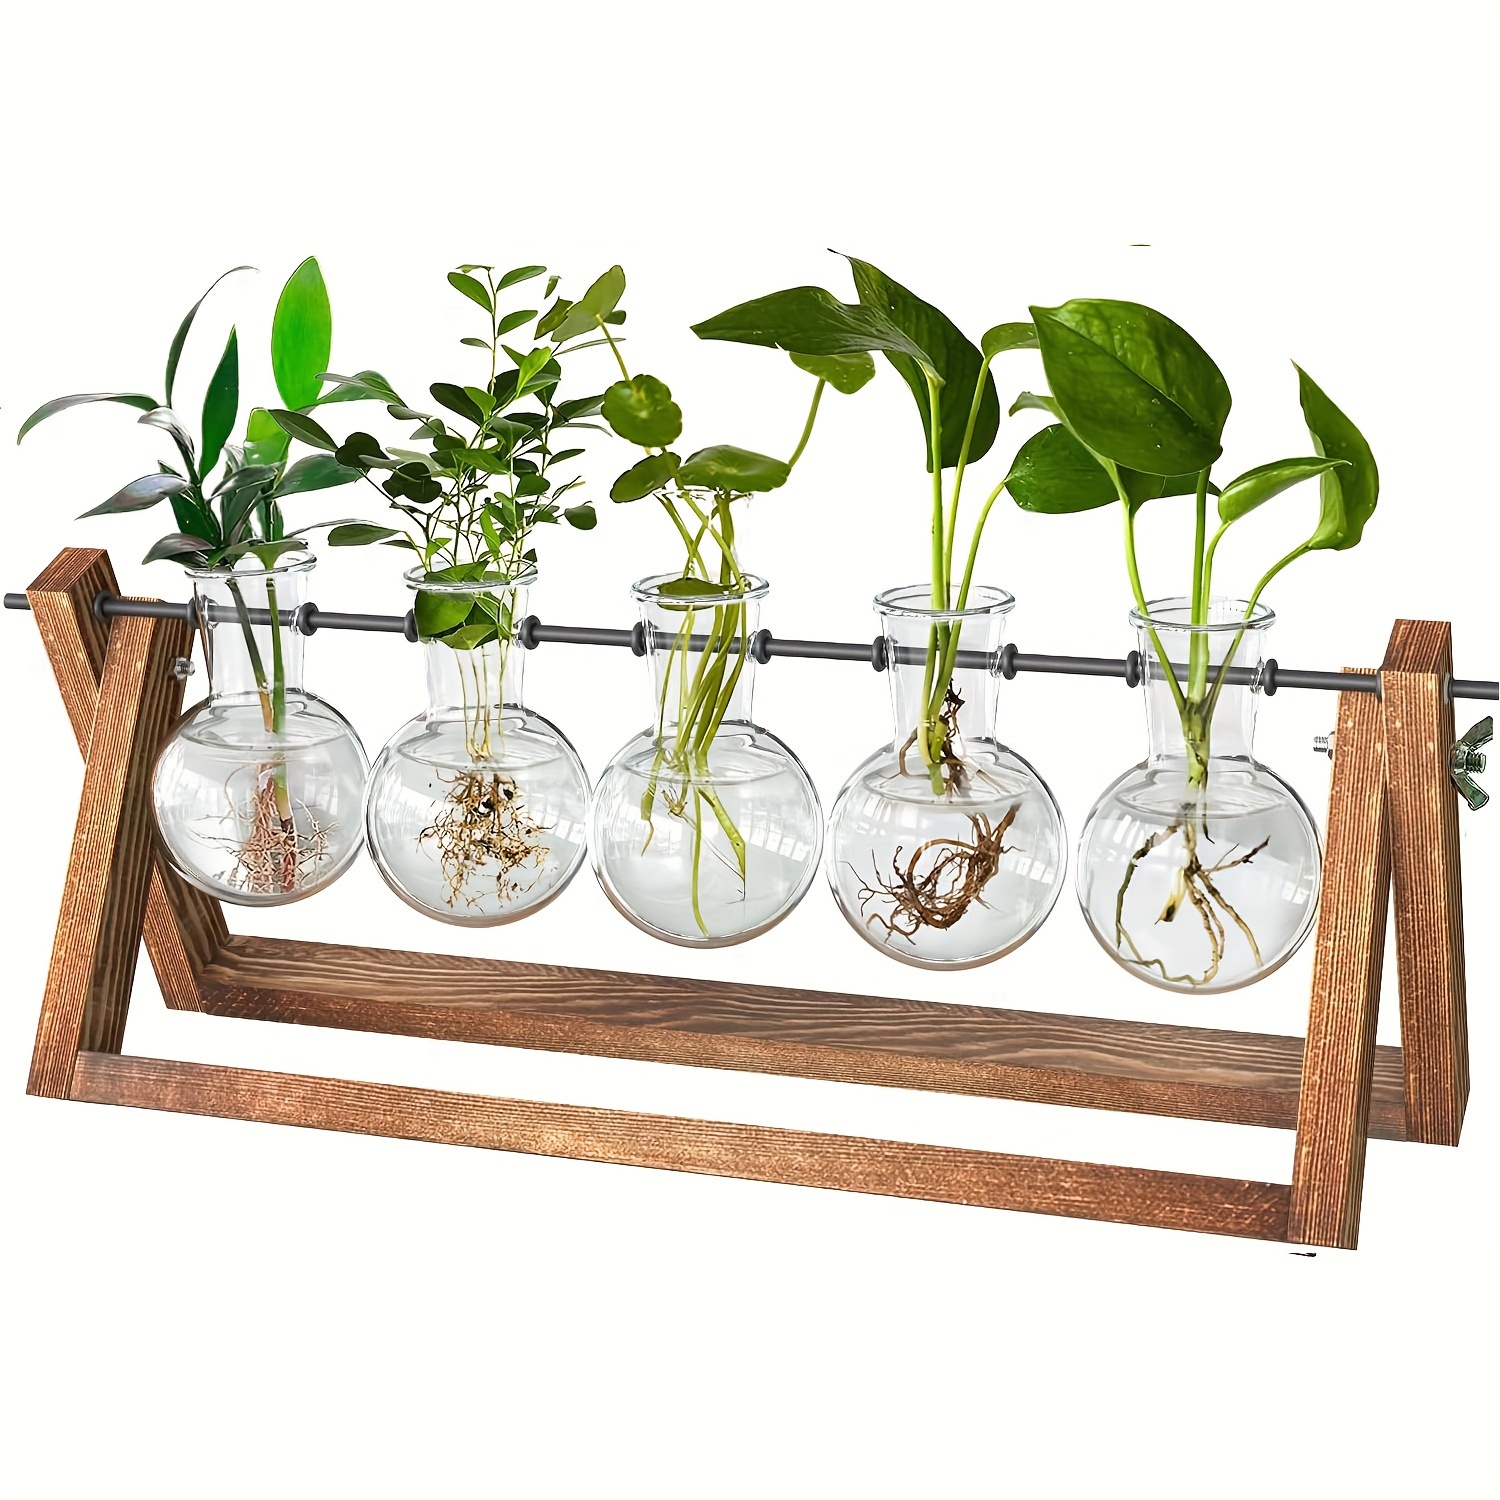 1pc desktop propagation station bulb plant terrarium with retro solid wooden stand and metal swivel holder for hydroponics plants home garden wedding decor